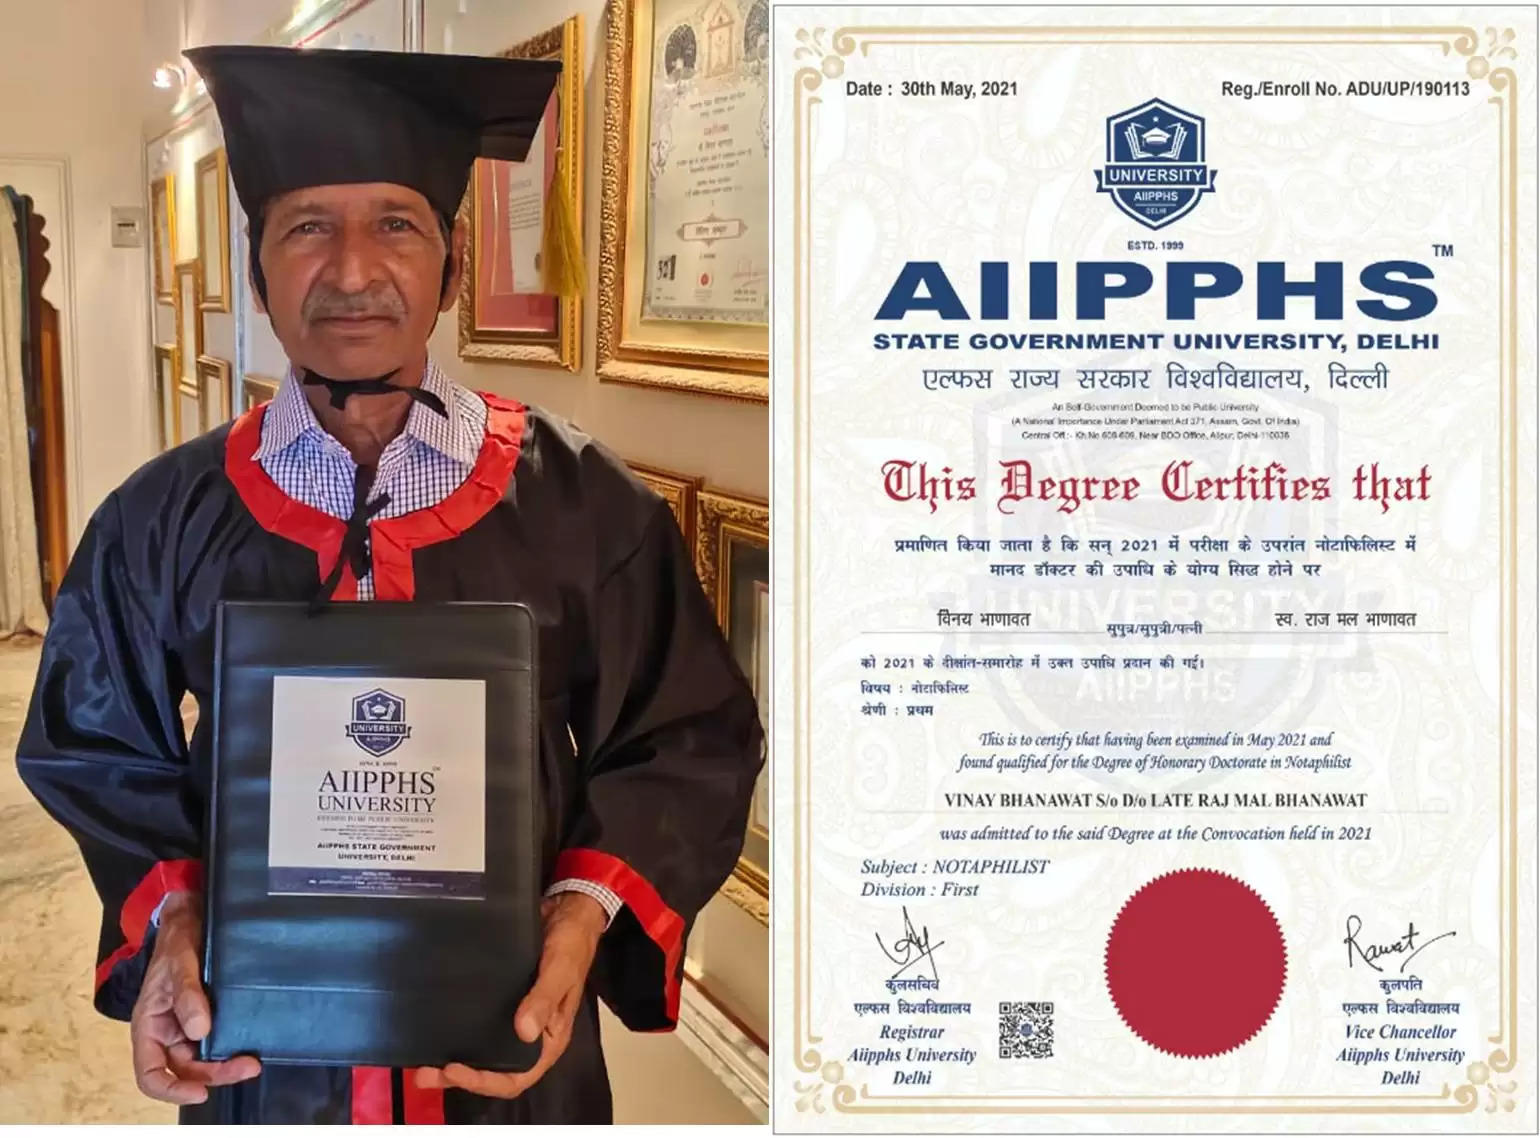 vinay bhanawat AIIPPS honorary doctorate currency man